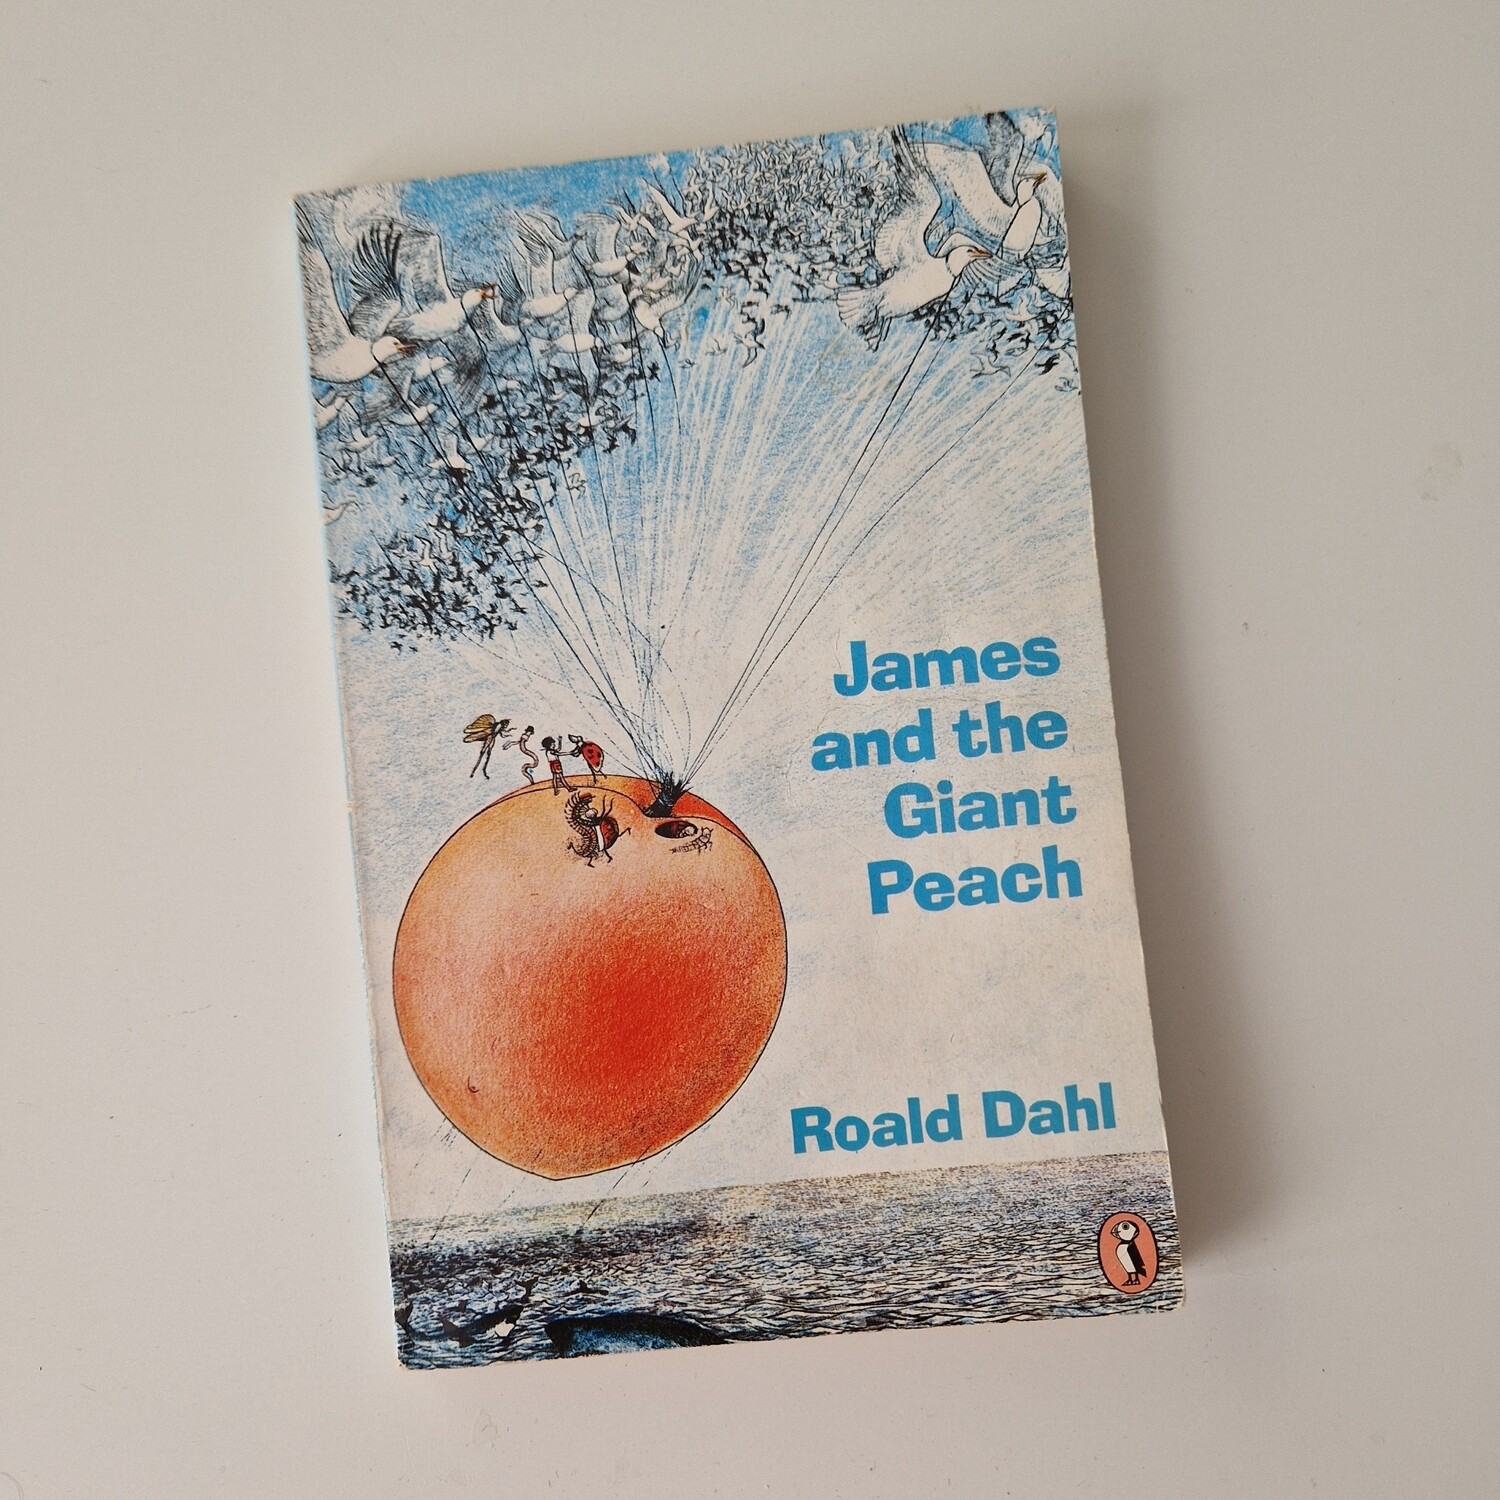 James and the Giant Peach Roald Dahl Notebook - made from a paperback book